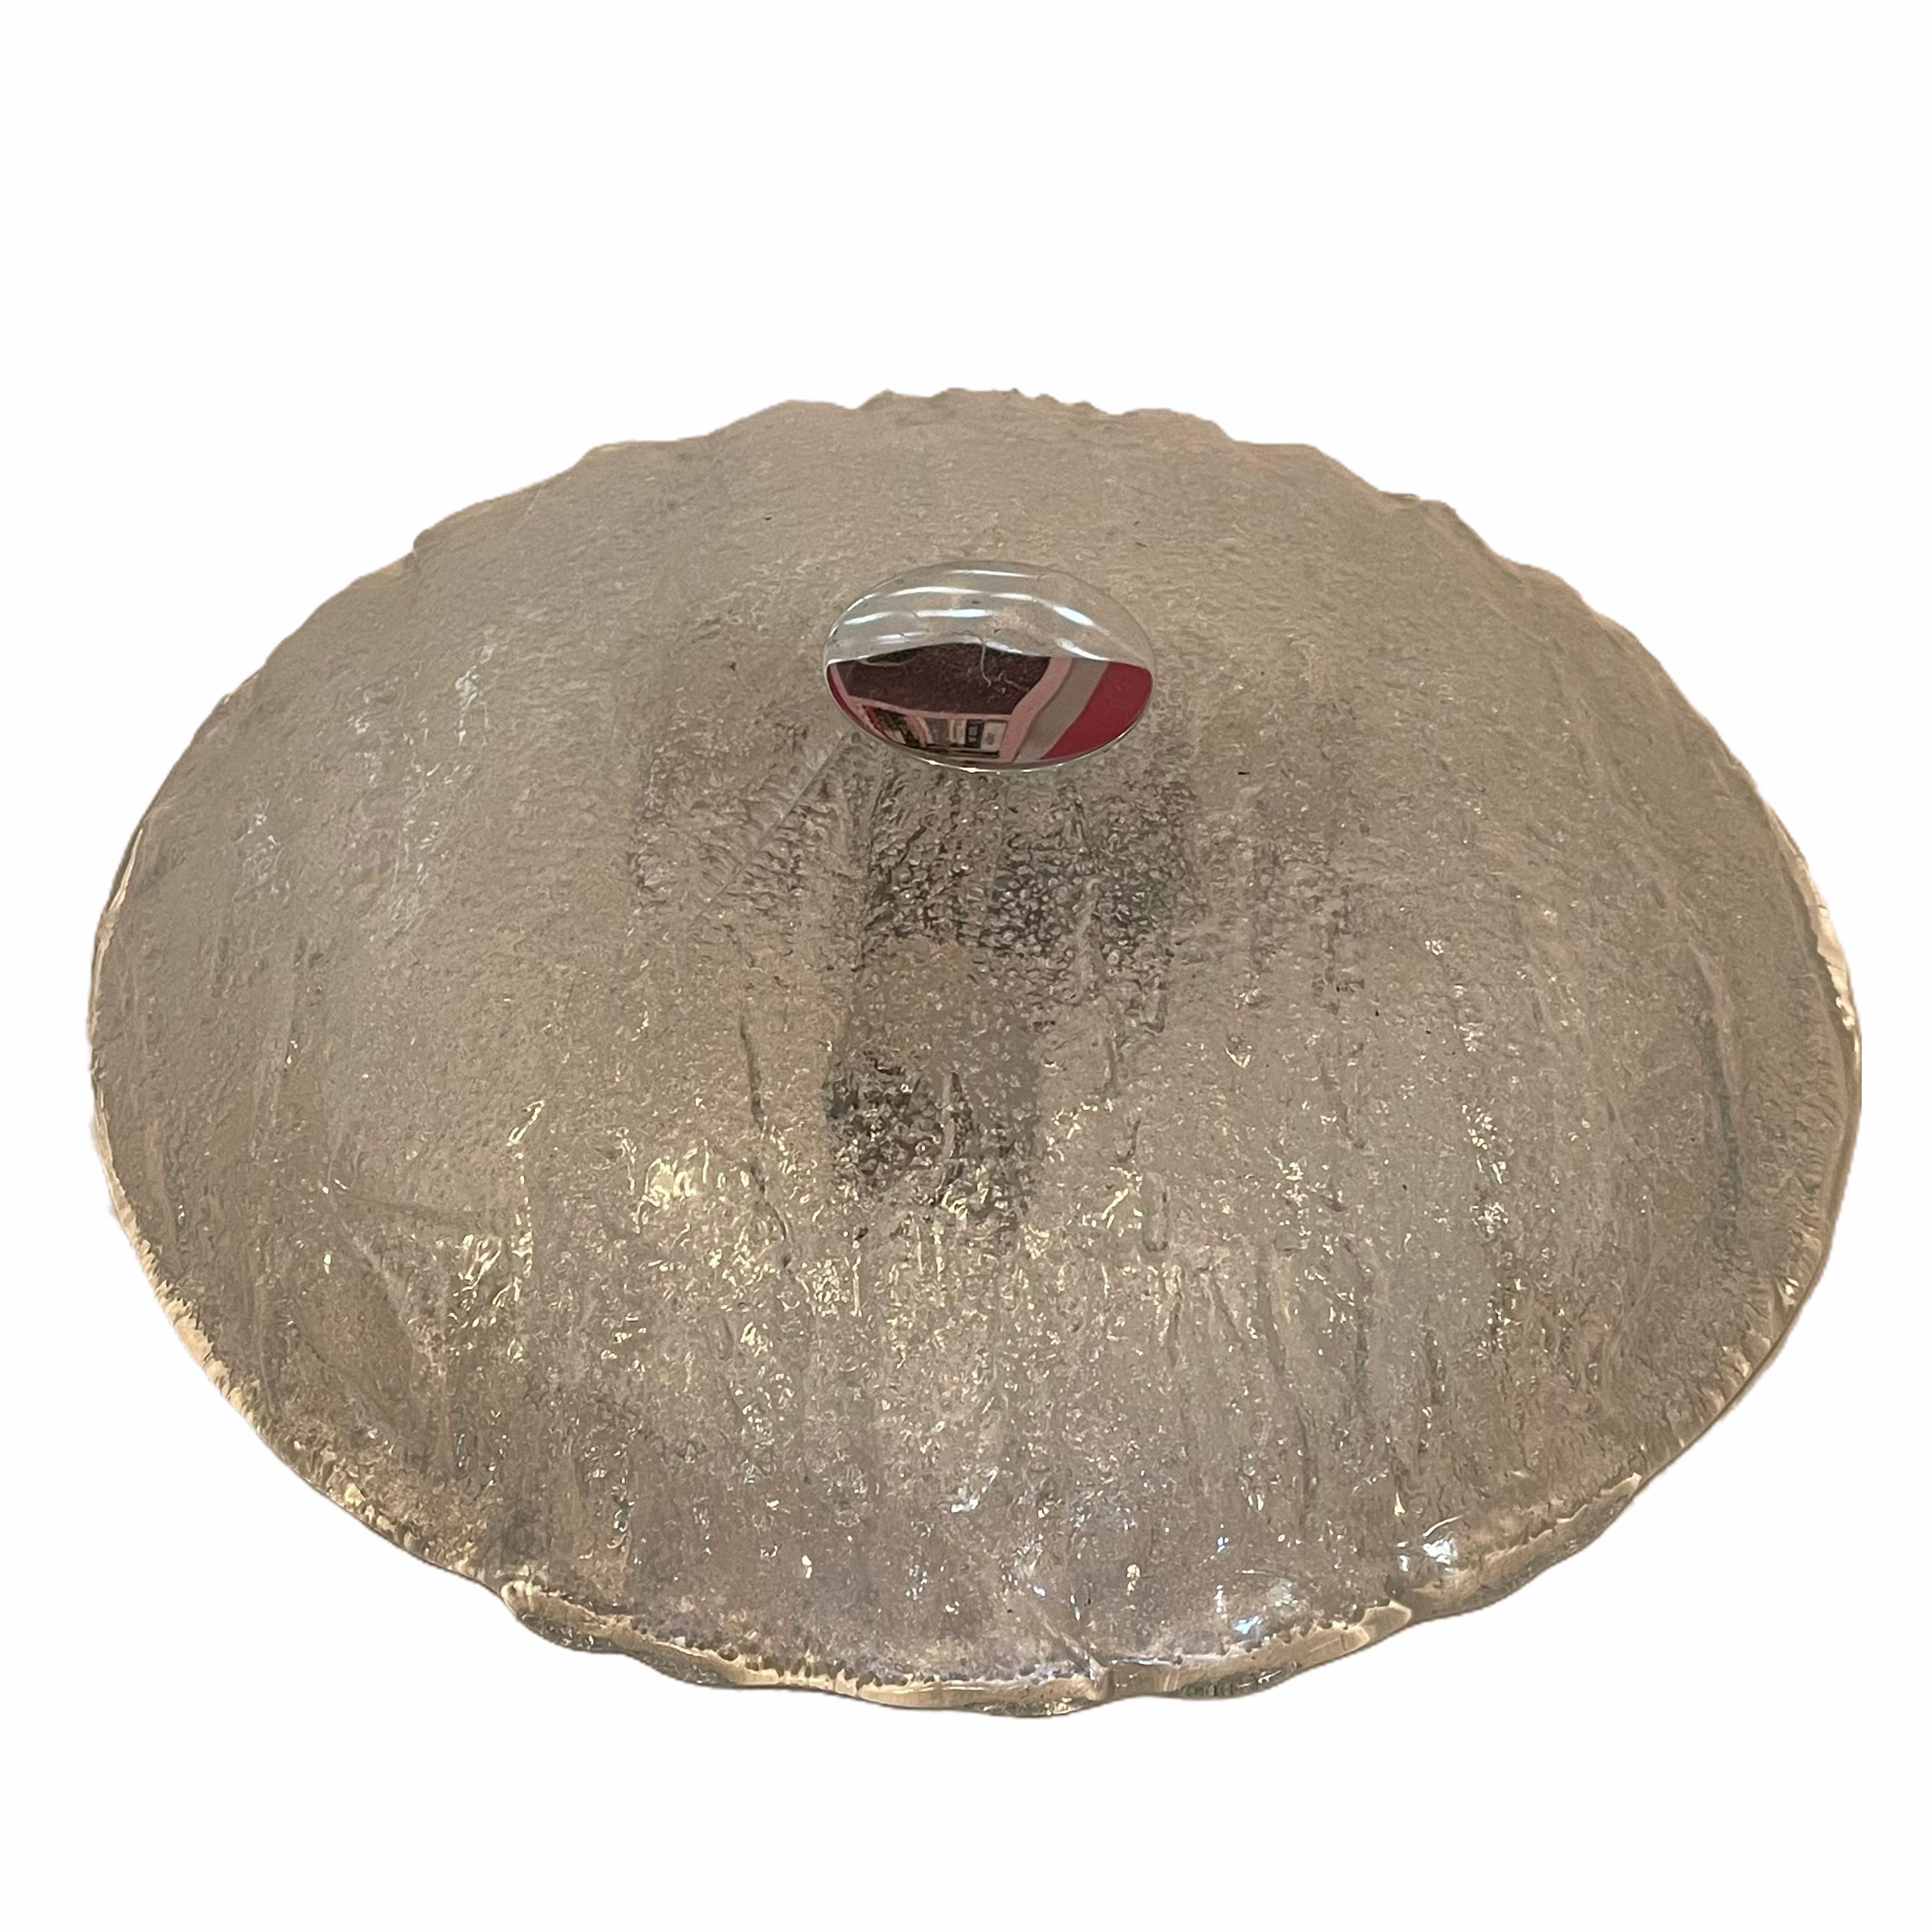 Beautiful flush mount with a heavy textured Murano glass on a metal fixture. The Murano glass is fixed with a brass screw on the metal fixture. It requires three European E14 / 110 Volt candelabra bulbs, each bulb up to 40 watts. Made by Honsel